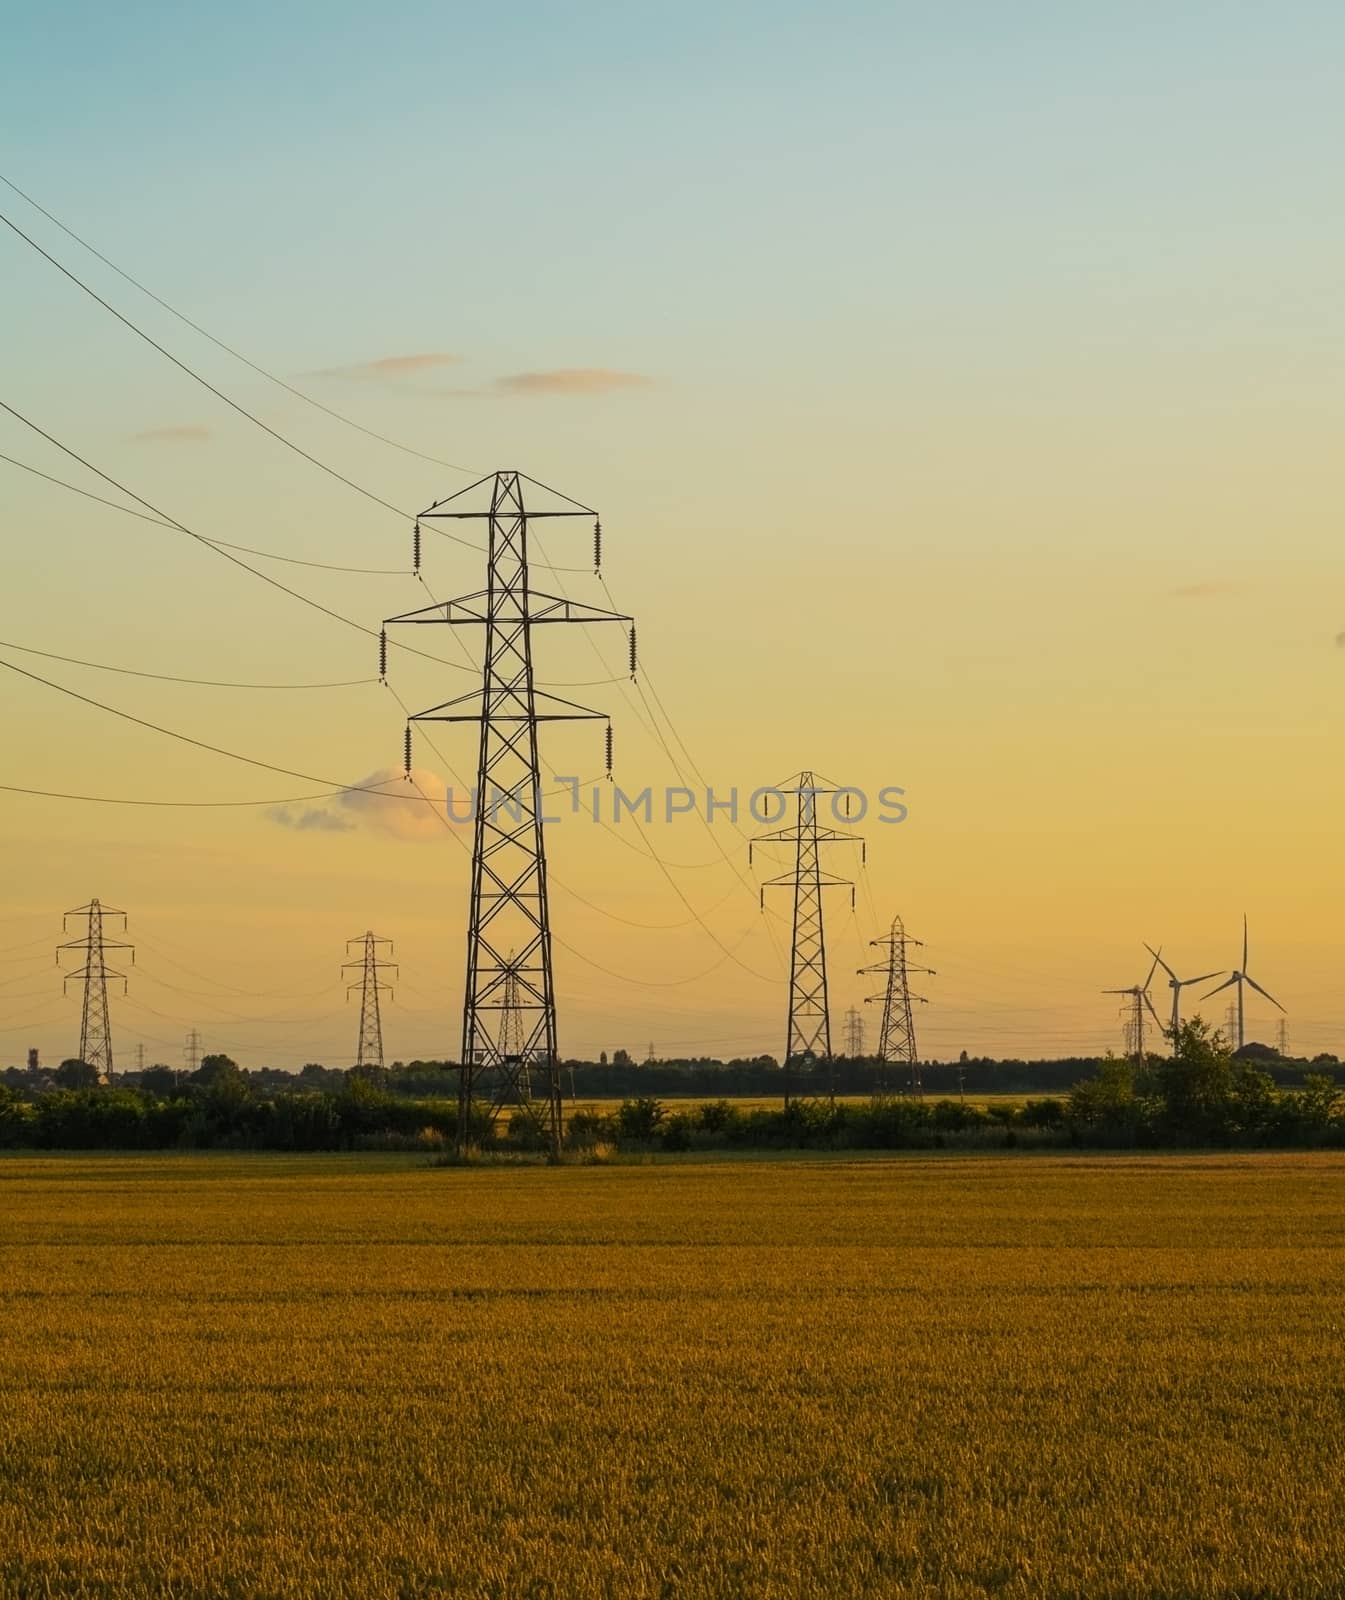 electricity pylons ina field in the early evening